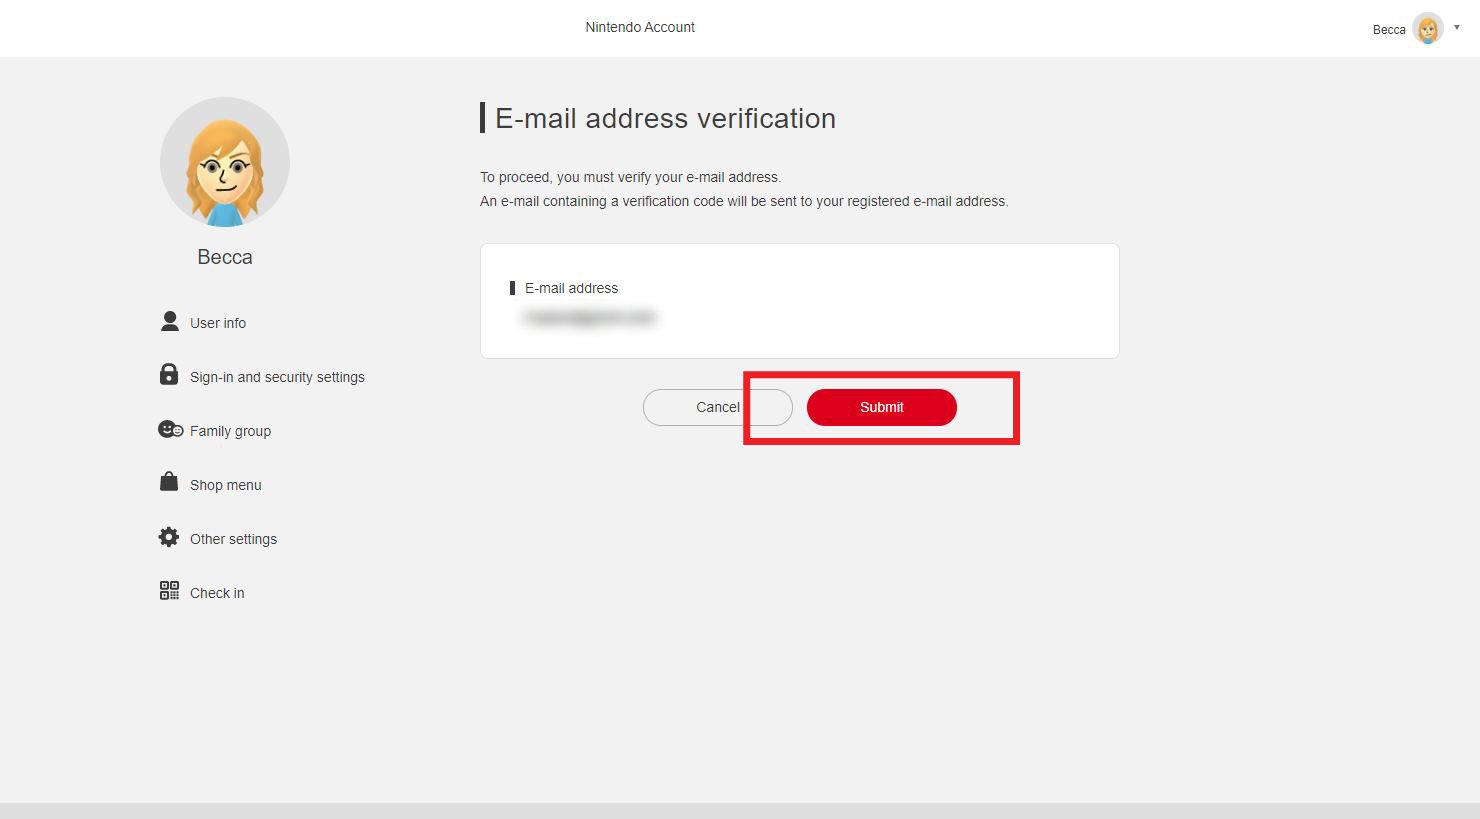 https://www.imore.com/sites/imore.com/files/styles/large/public/field/image/2020/04/how-to-two-factor-authentication-nintendo-switch-007.jpg?itok=8m6zbhJ6